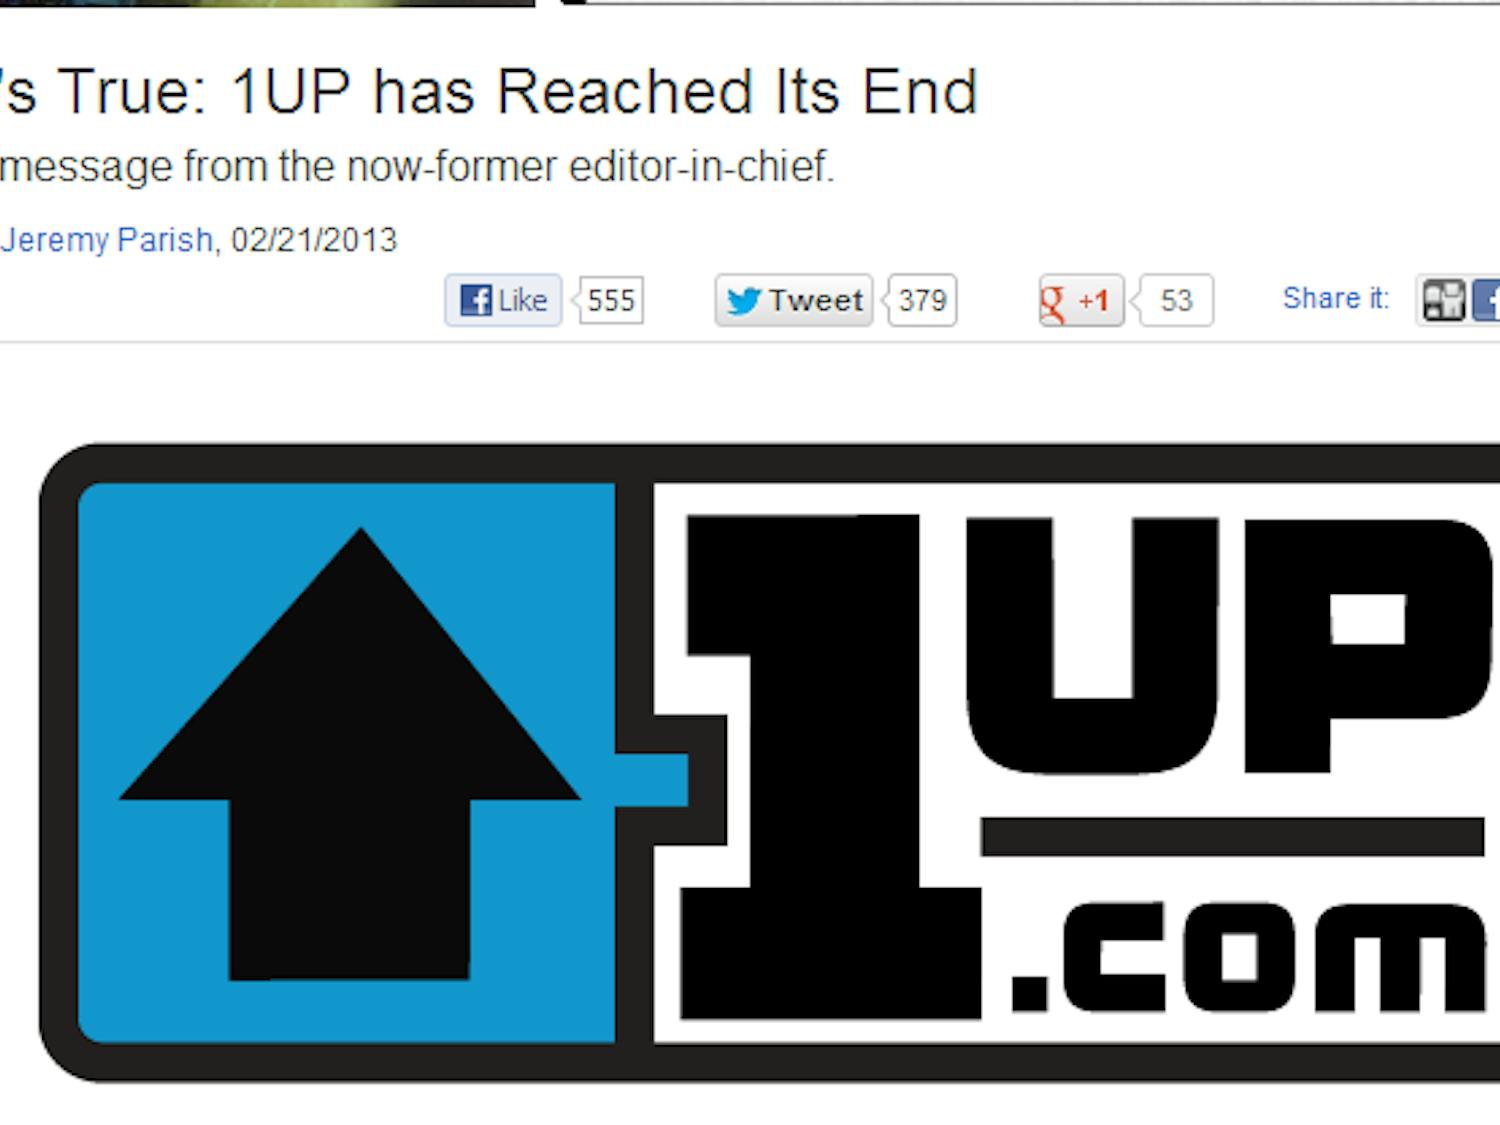 1UP.com’s former Editor-in-Chief wrote a heartfelt letter to the readers, thanking them for their passionate support while providing some insight into why it was time to say “Good-Bye.” Screenshot by Preston Sotelo